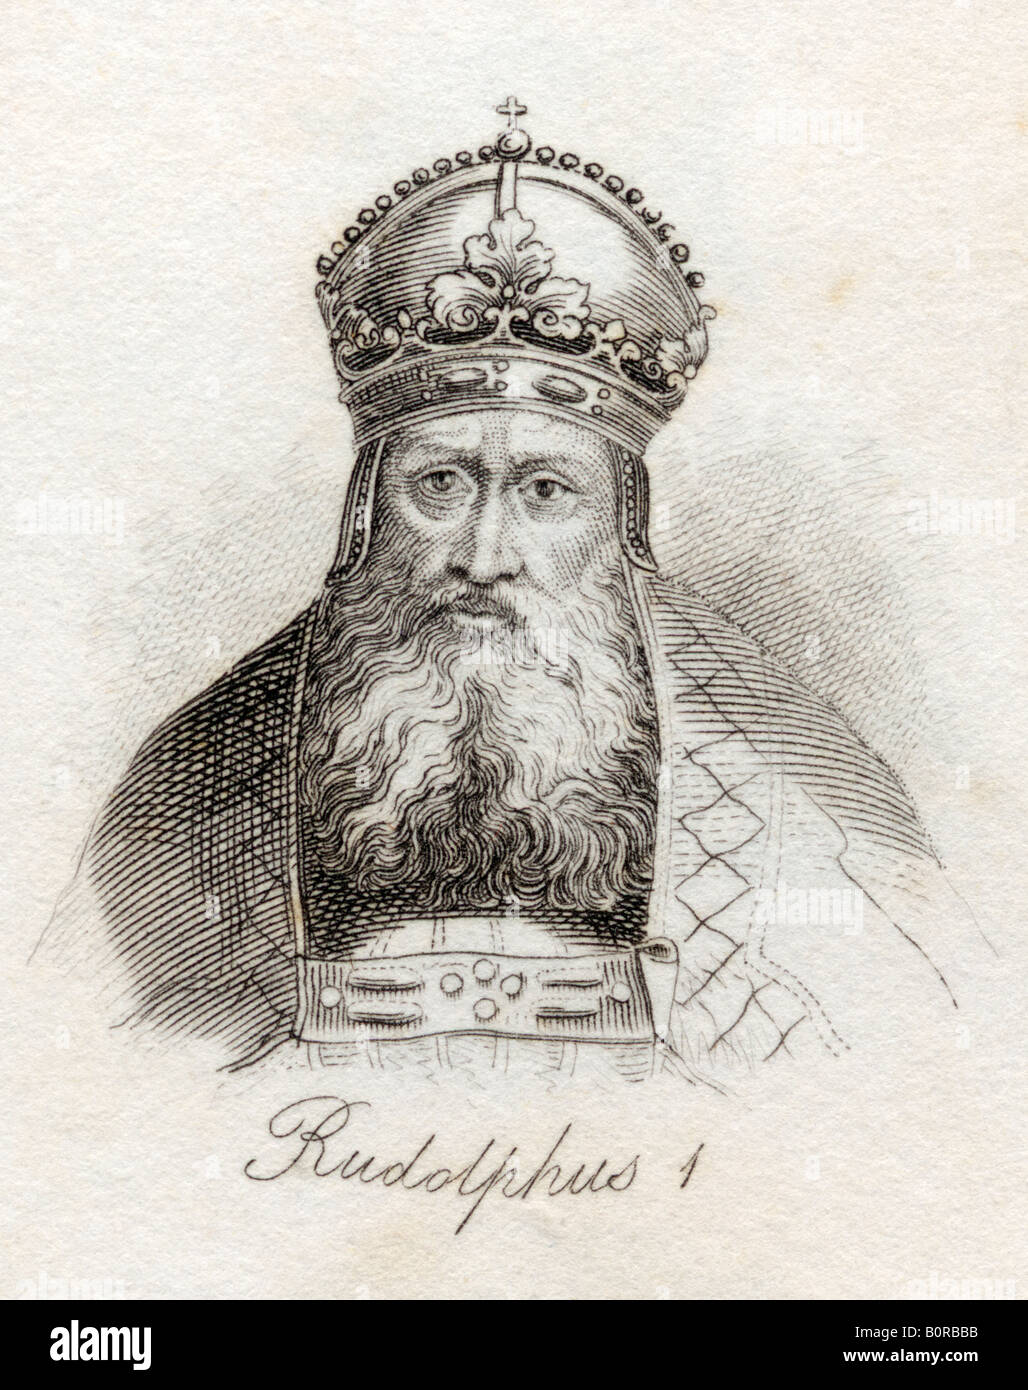 Rudolph I of Germany, Rudolph of Habsburg, 1218 - 1291. King of the Holy Roman Empire. Stock Photo